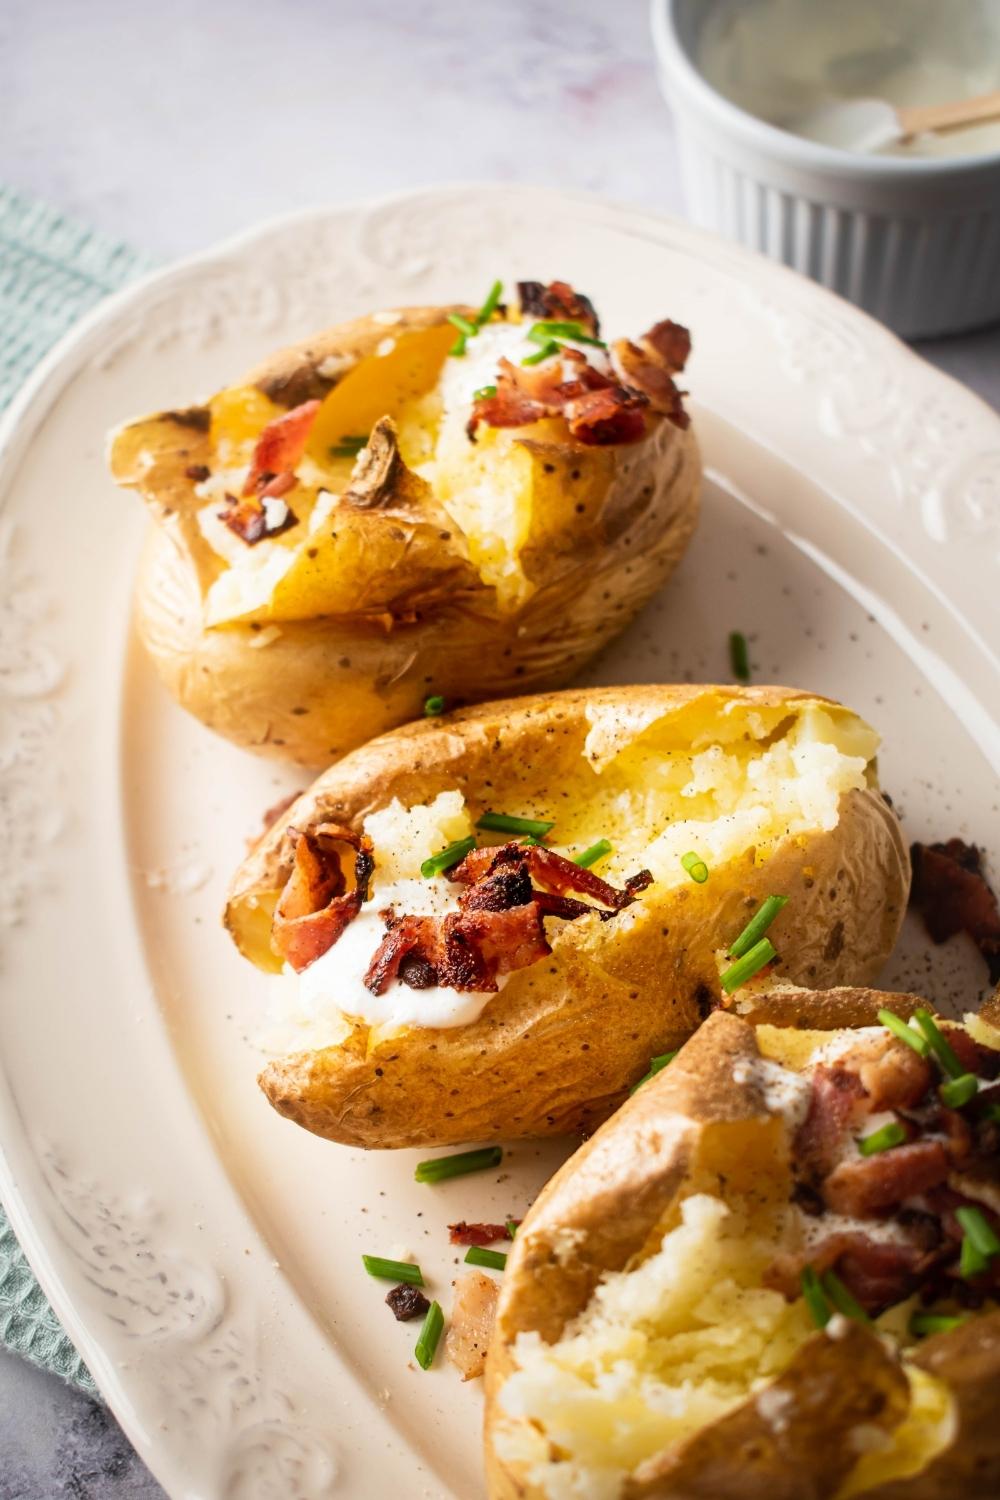 A white plate with three split open baked potatoes on it. The baked potatoes have some chives, sour cream, and bacon in them.